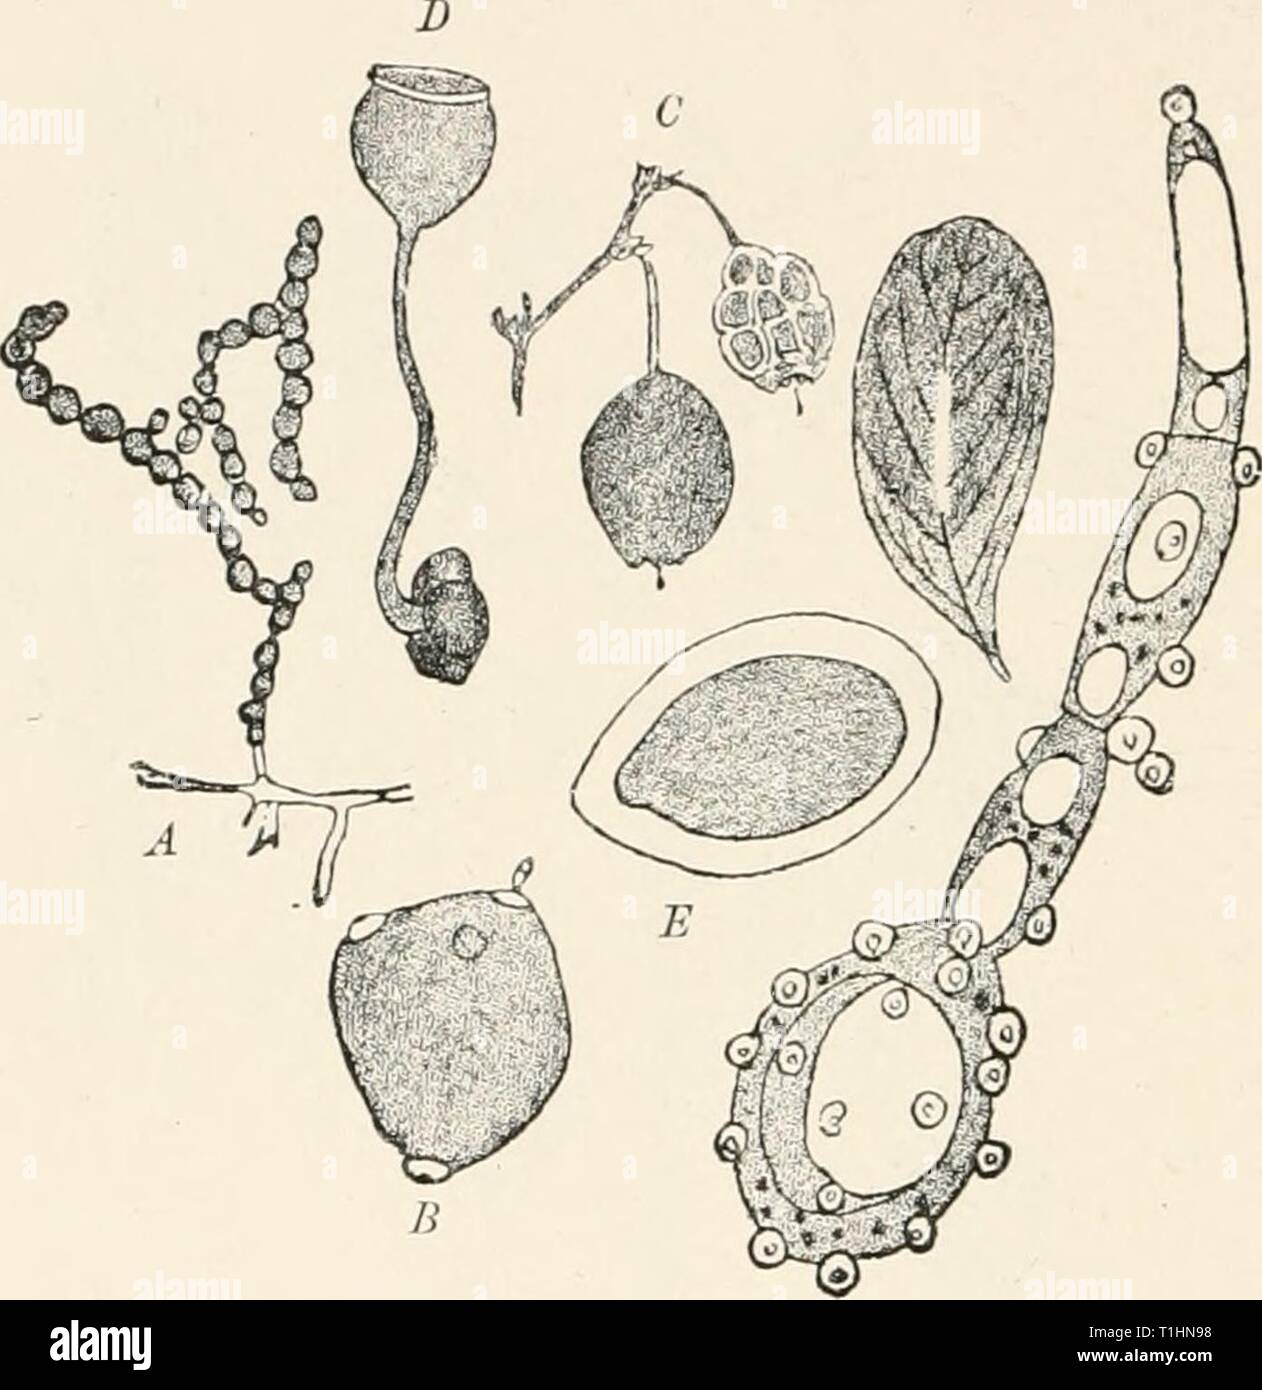 Diseases of plants induced by Diseases of plants induced by cryptogamuc parasites; introduction to the study of pathogenic fungi, slime-fungi, bacteria, and algae. English ed. by William G. Smith  diseasesofplants00tubeuoft Year: 1897  260 ASCOMYCETES. larger and four smaller spores, the latter appearing to be rudi- mentary and incapable of germination. Scl. baccarum Schroet. (Britain).- The sclerotium disease of the bilberry (Vacc. 3yrtillus). This varies from the other species in having round conidia incapable of germinating in water, in having more robust apothecial beakers, and in lacking  Stock Photo